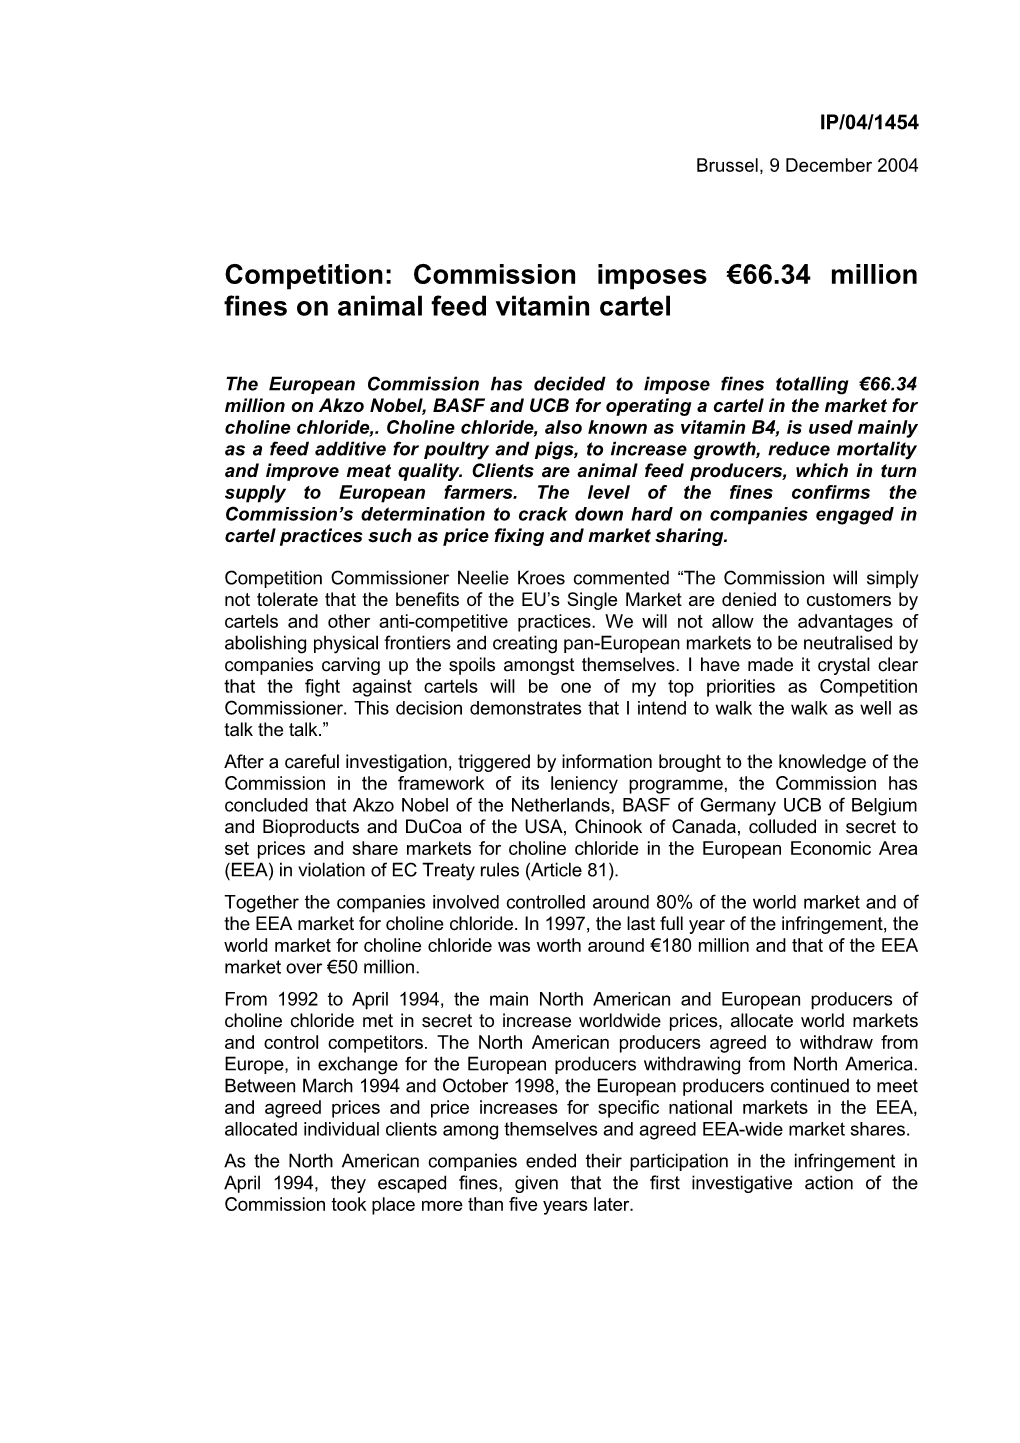 Competition: Commission Imposes 66.34 Million Fines on Animal Feed Vitamin Cartel